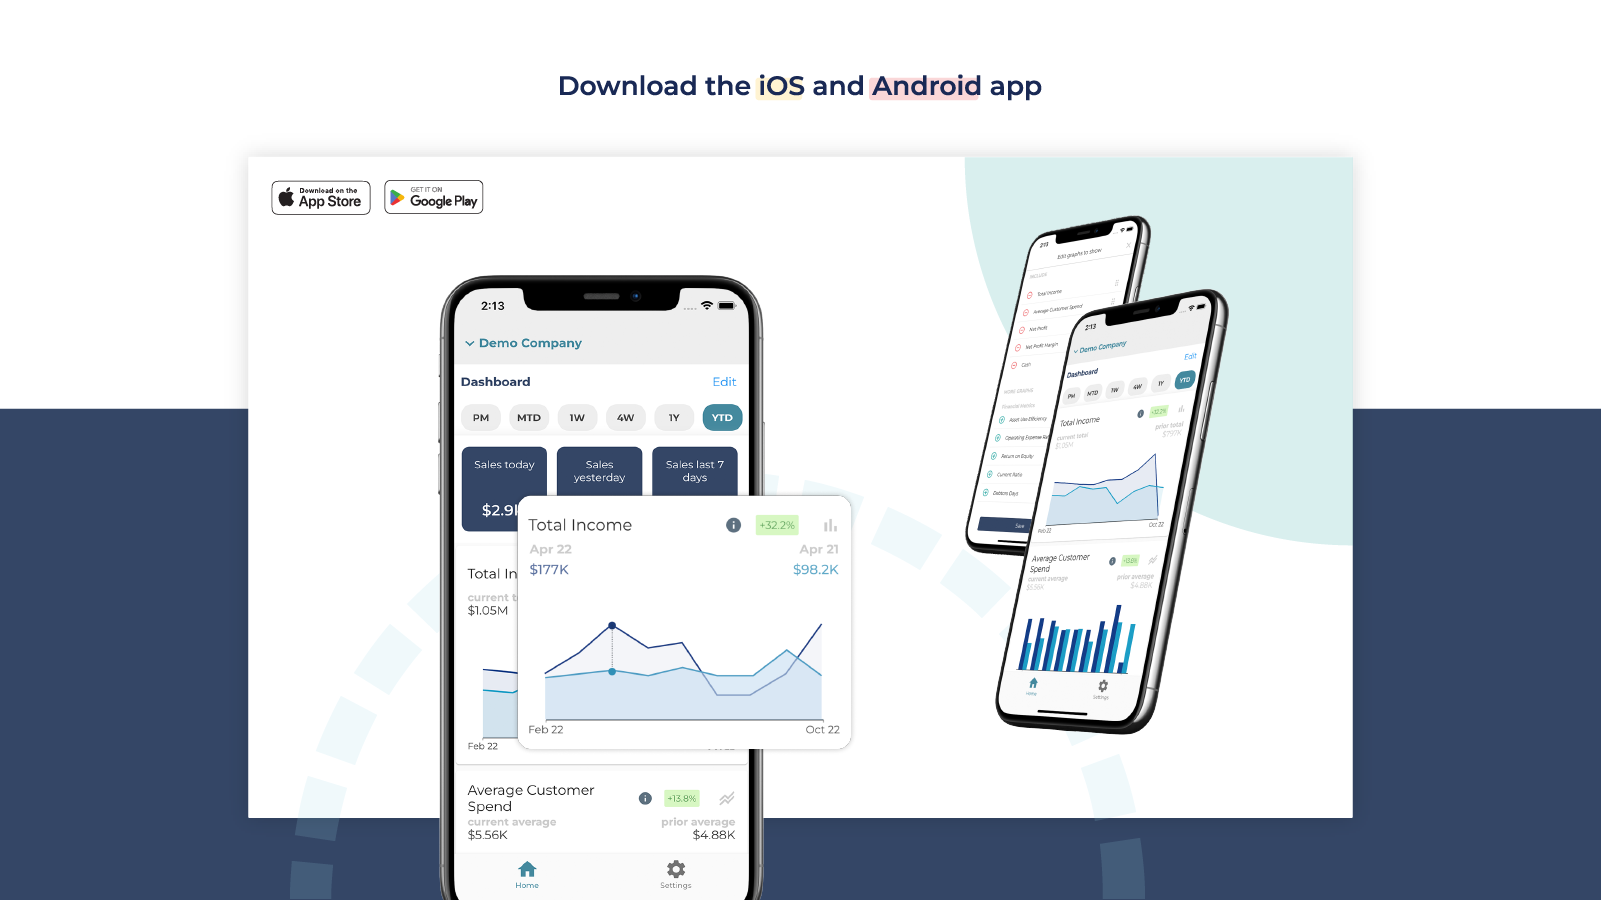 Download the iOS or Android app: Track your performance on the go with the Syft mobile app. View financial, sales, customer and product metrics and compare to the prior period - all at your fingertips.